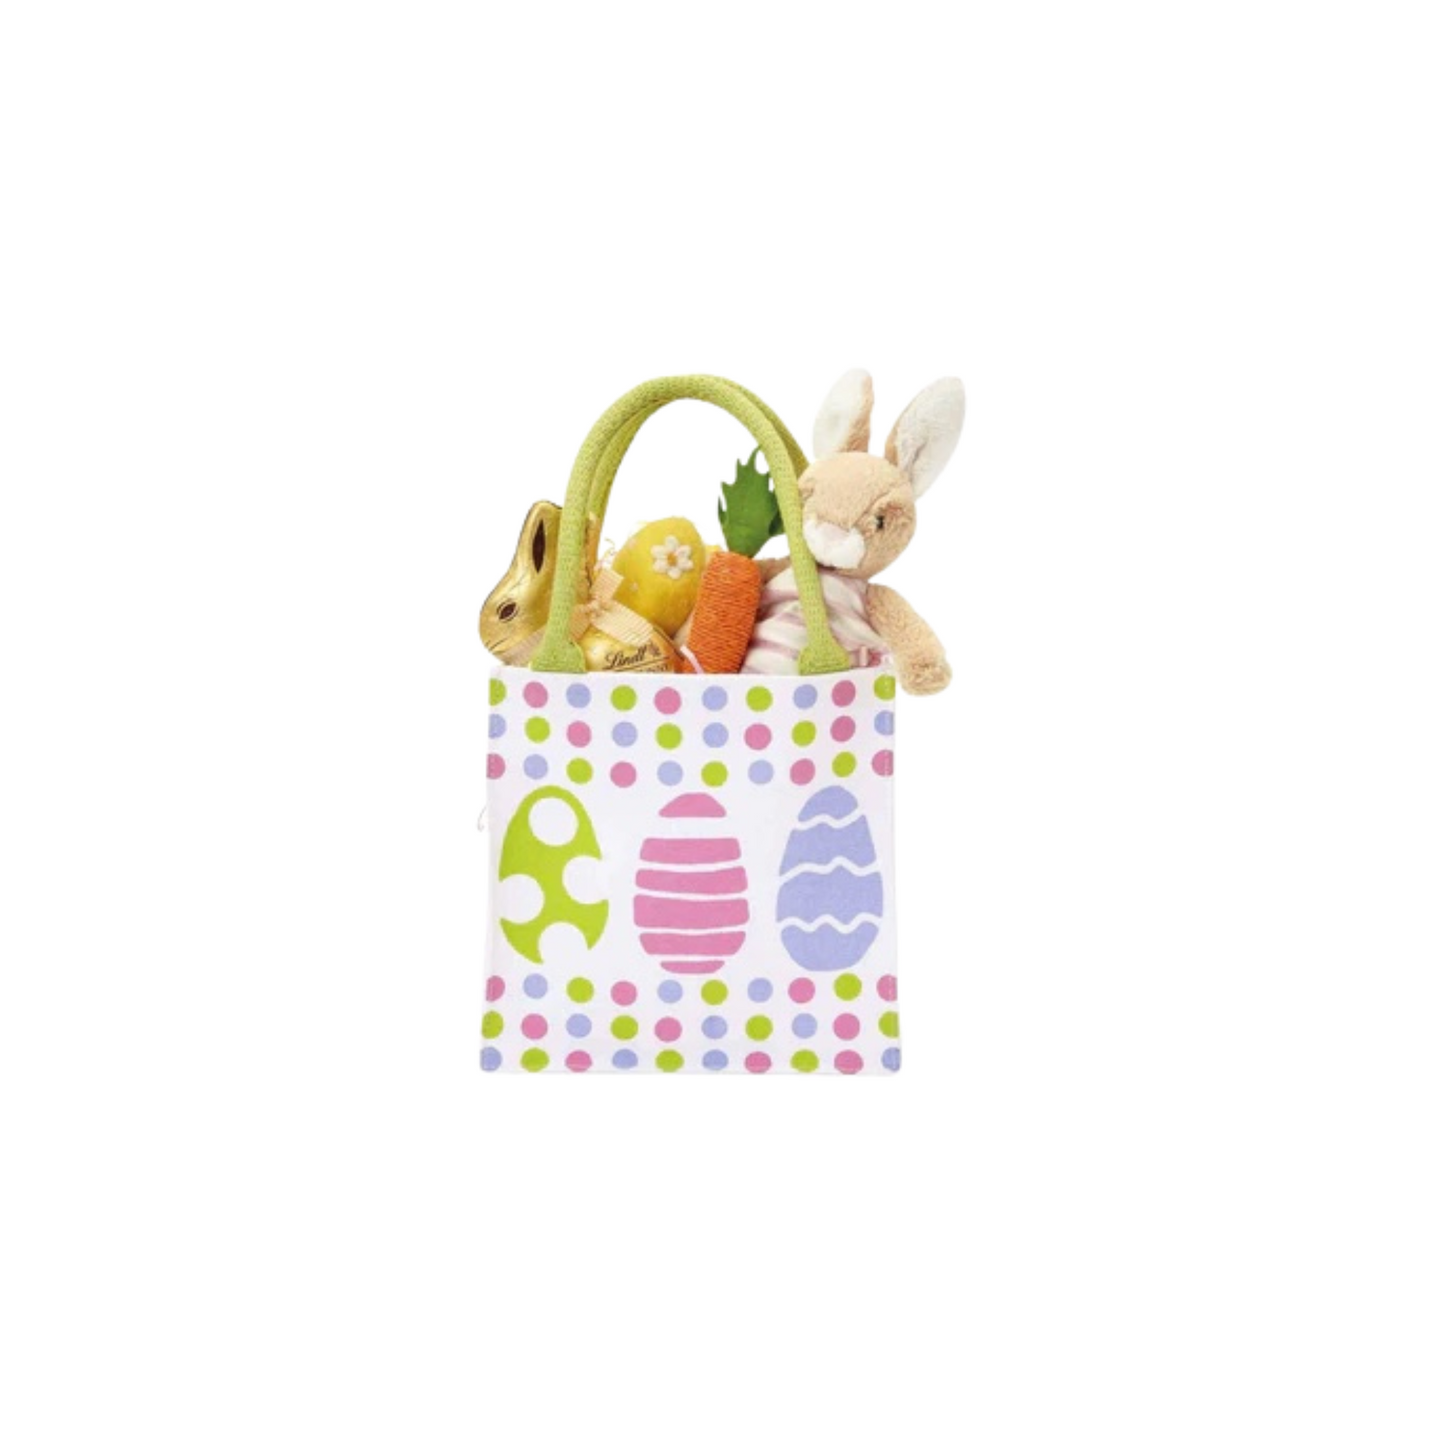 Painted Eggs Itsy Bitsy Bag